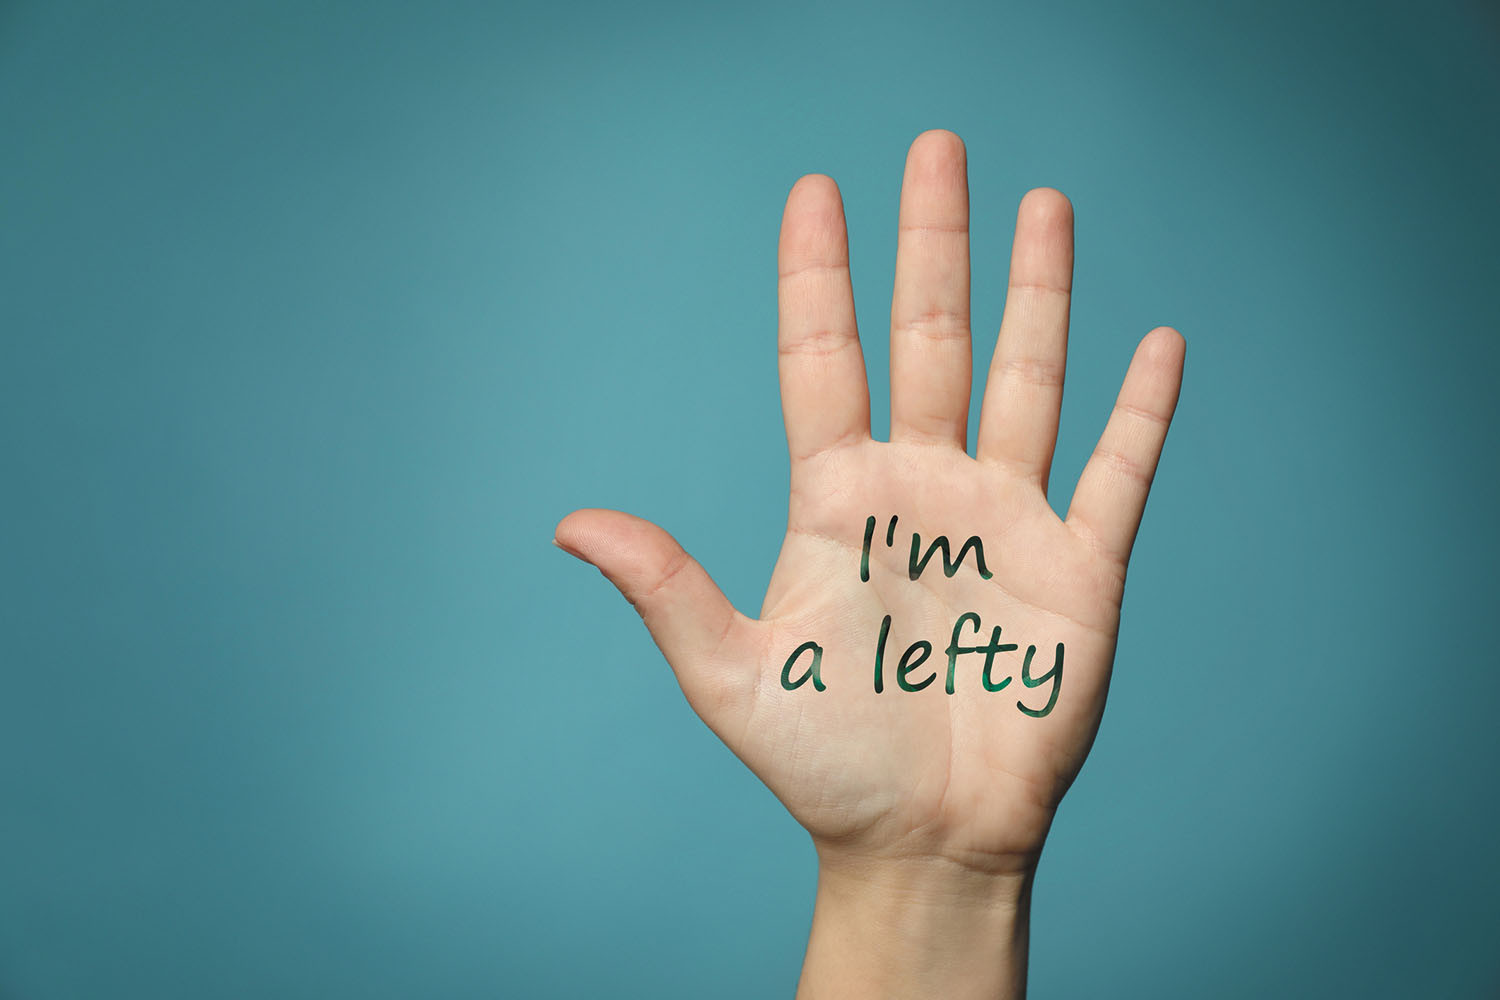 photo of a person's left hand with I'm a lefty written on the palm